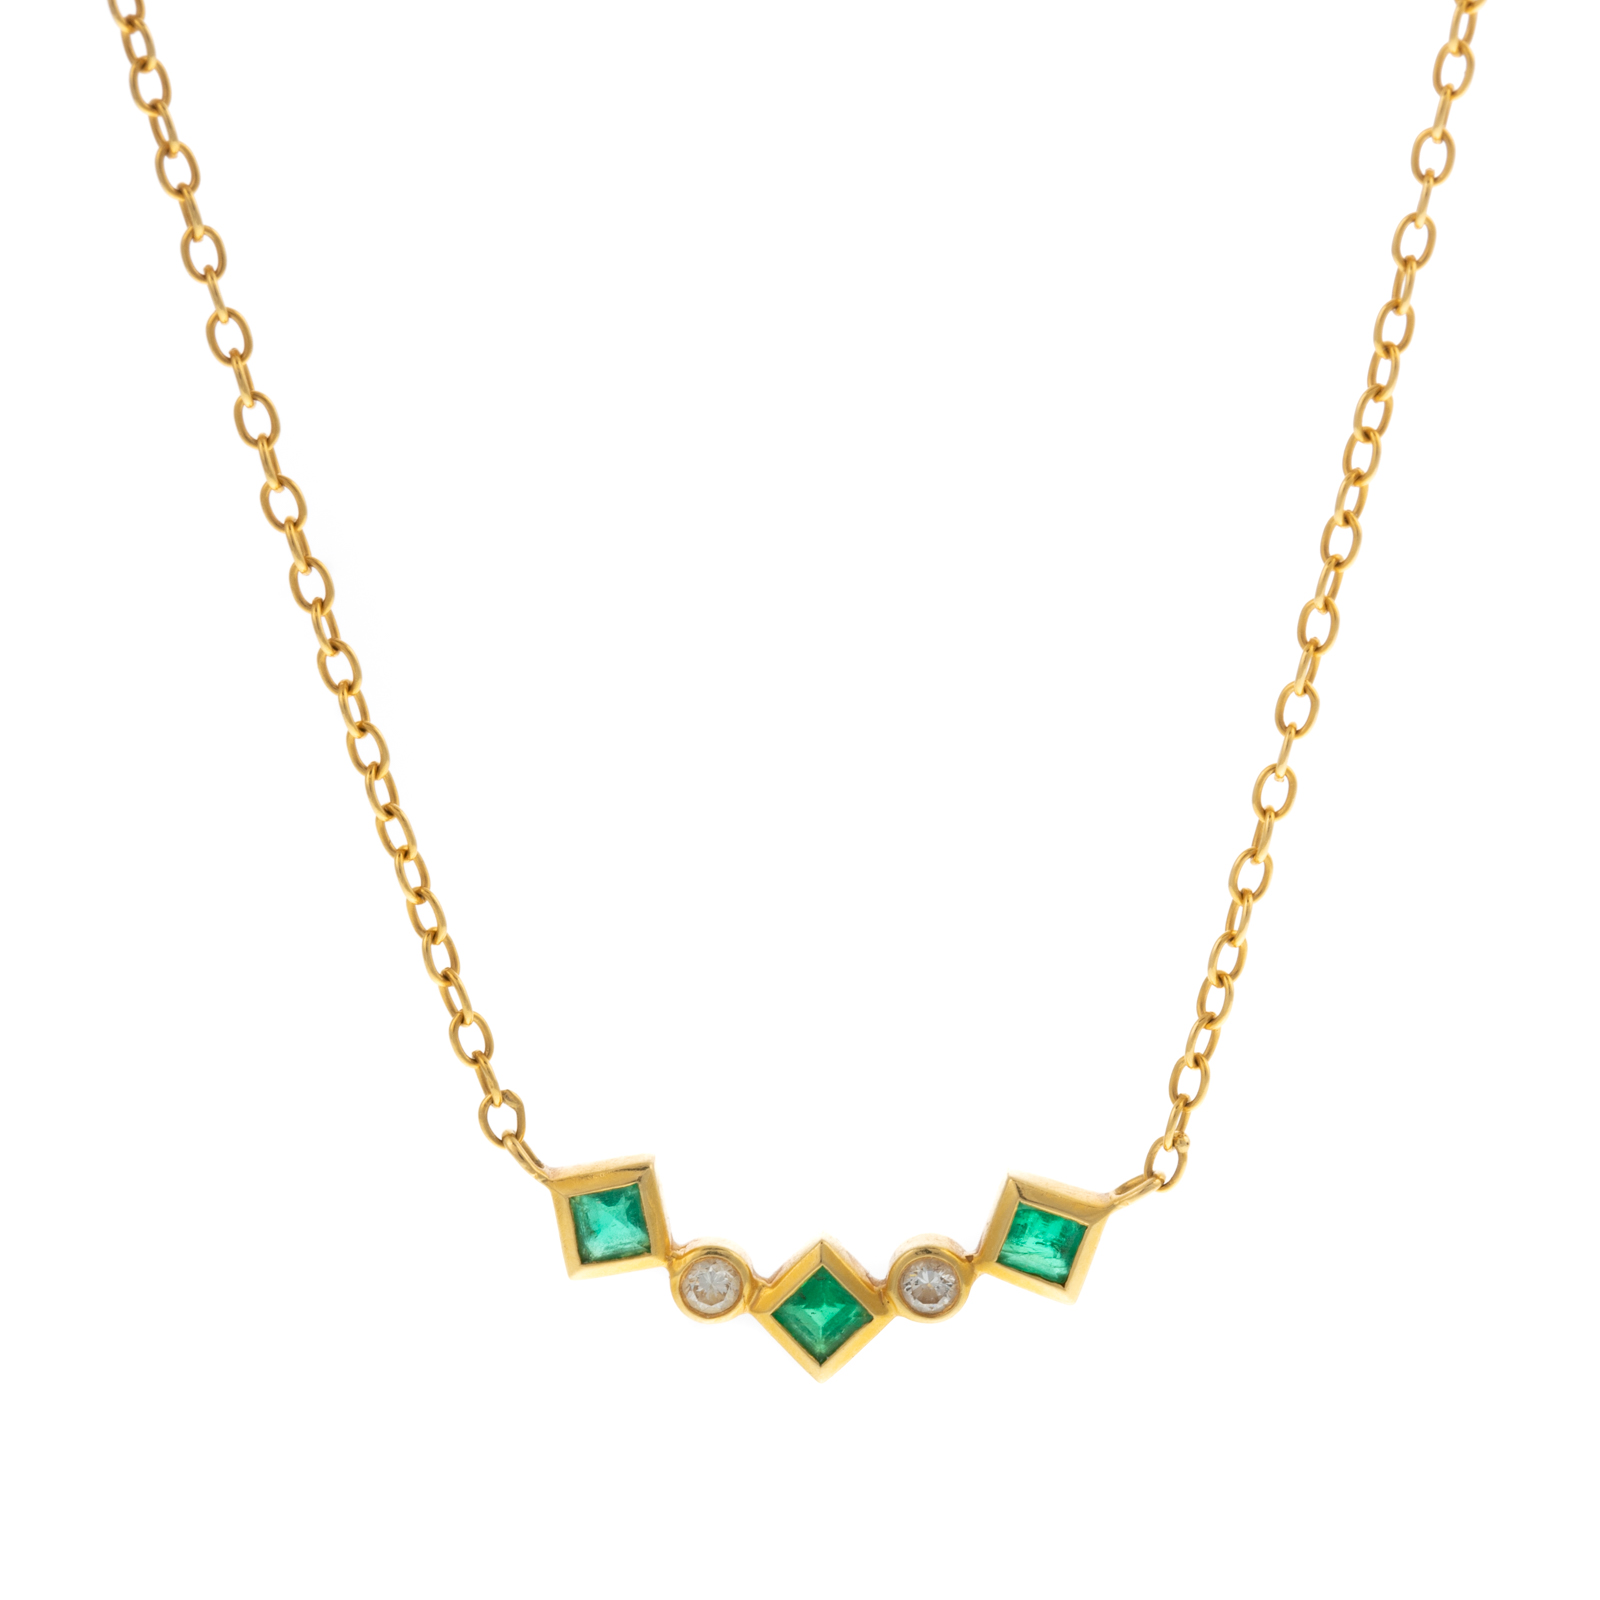 AN EMERALD DIAMOND NECKLACE IN 338692